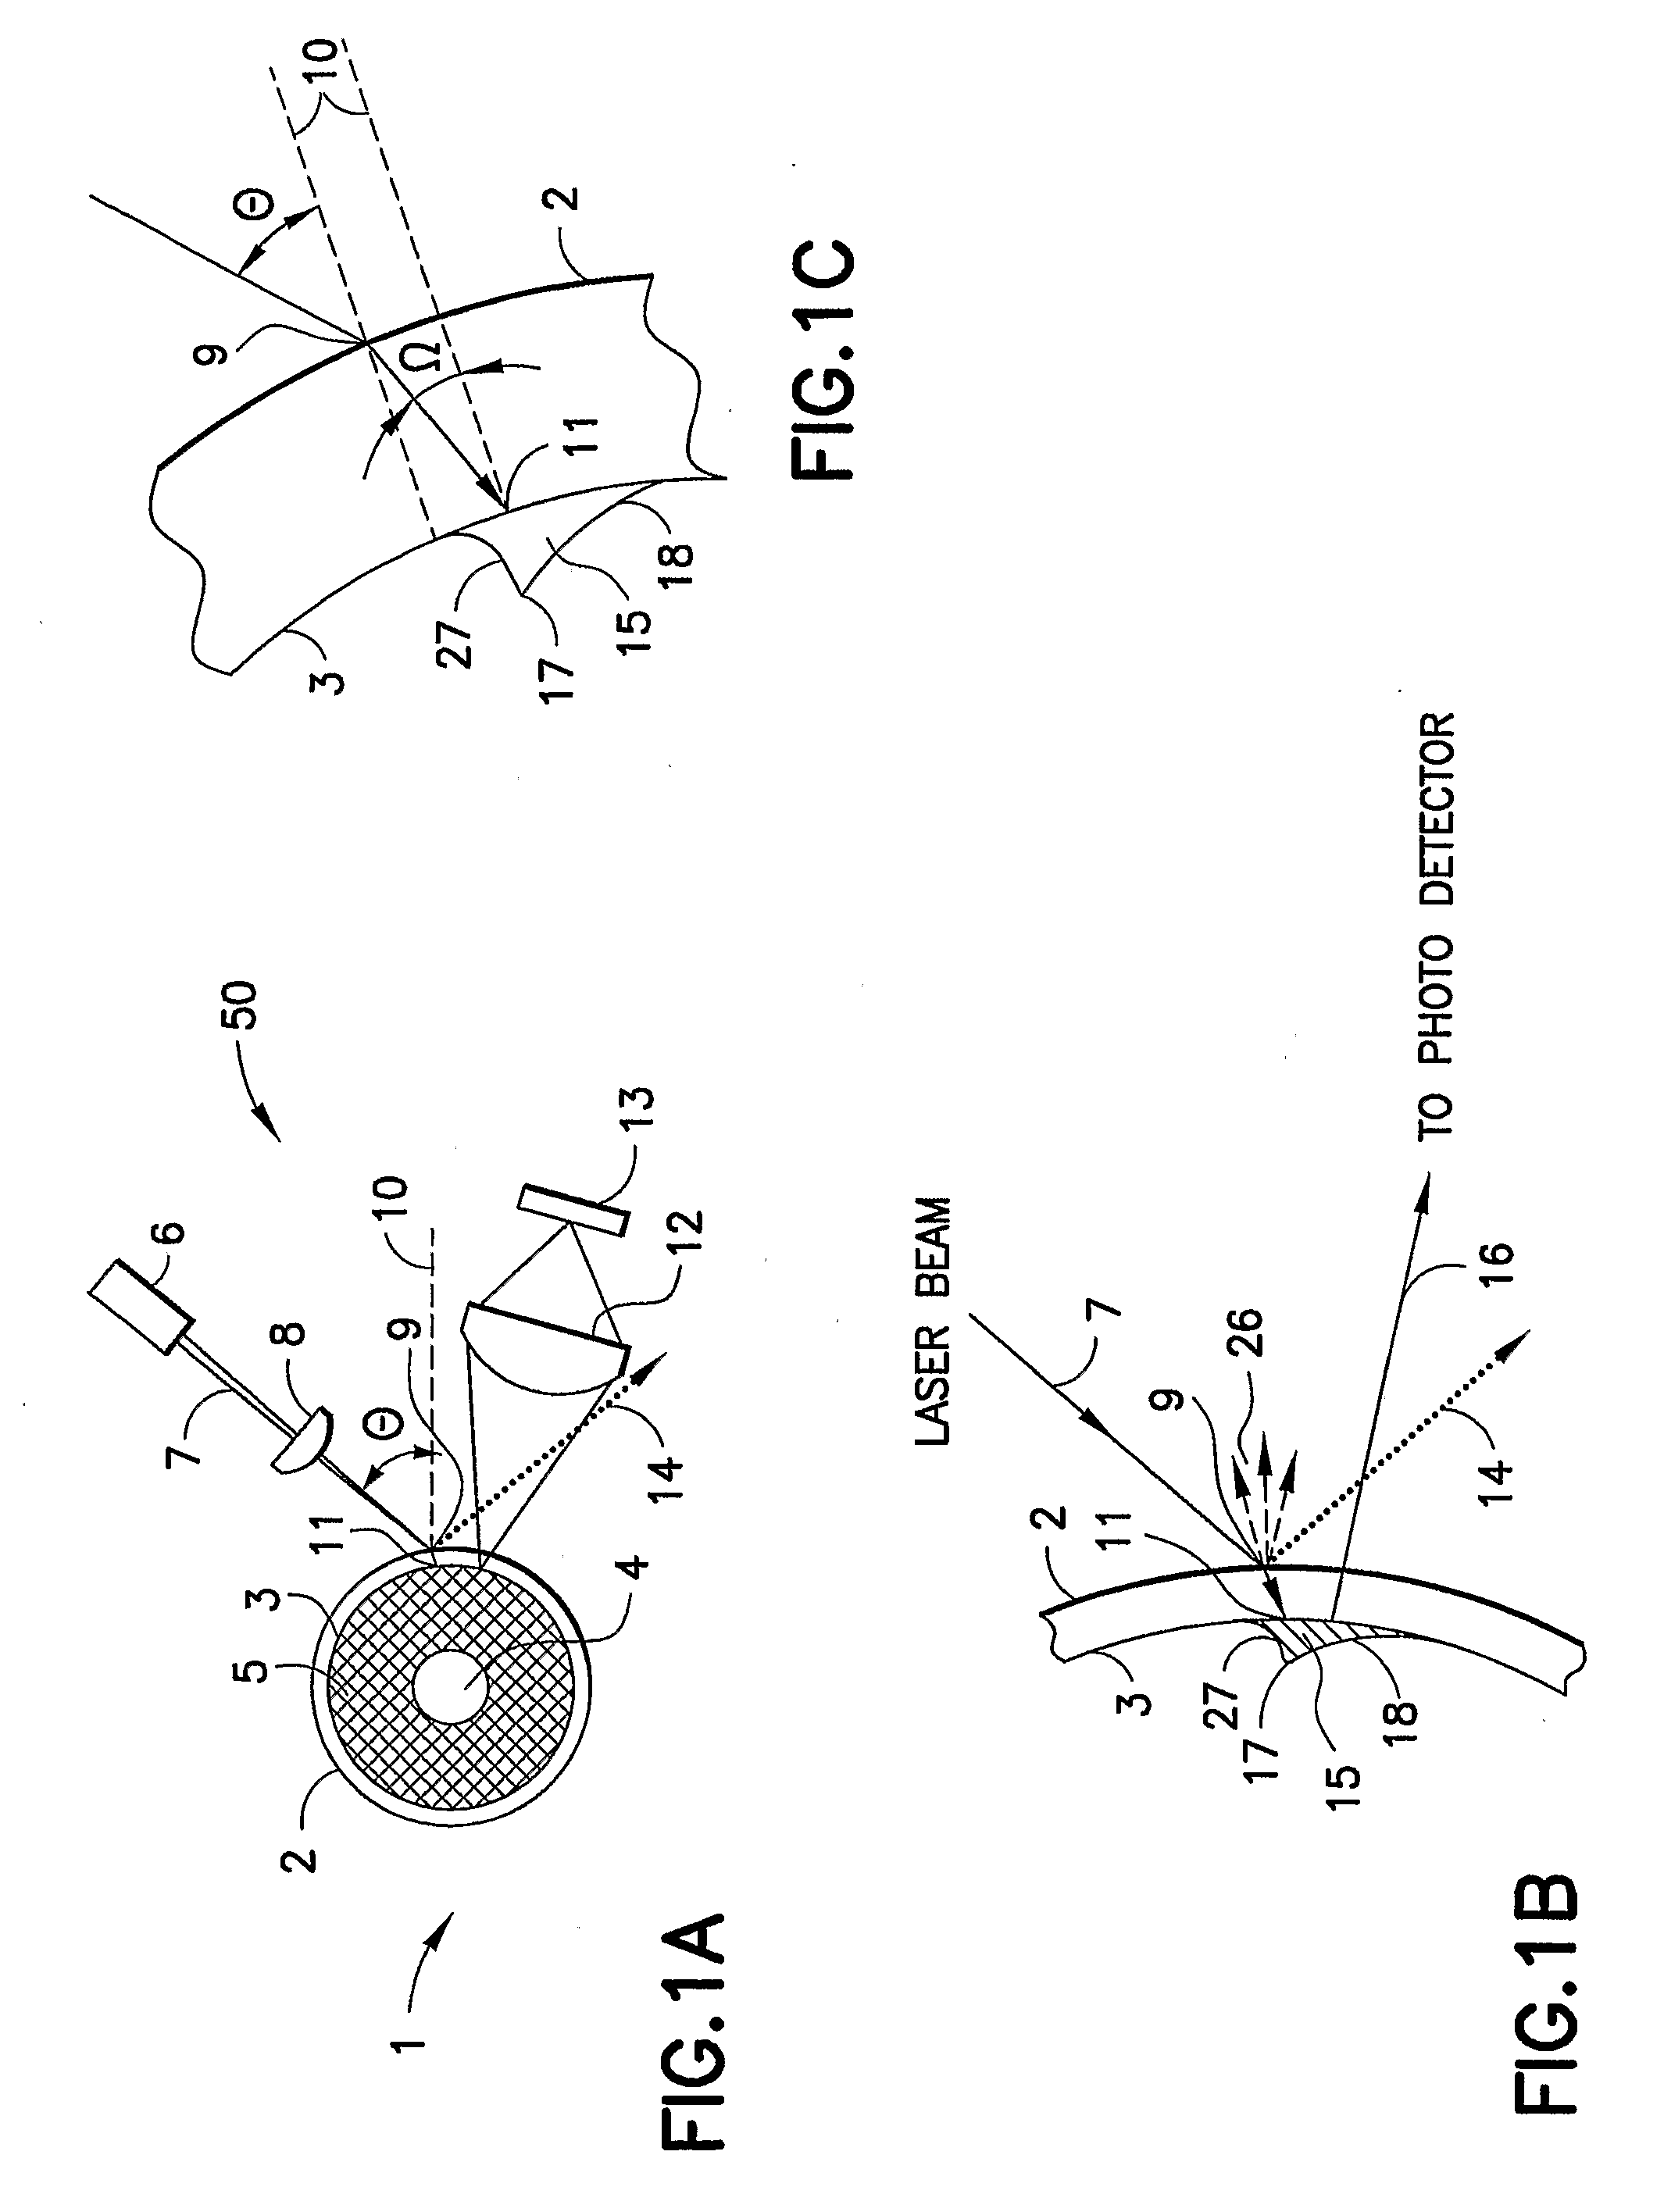 Apparatus for Performing Optical Measurements on Blood Culture Bottles